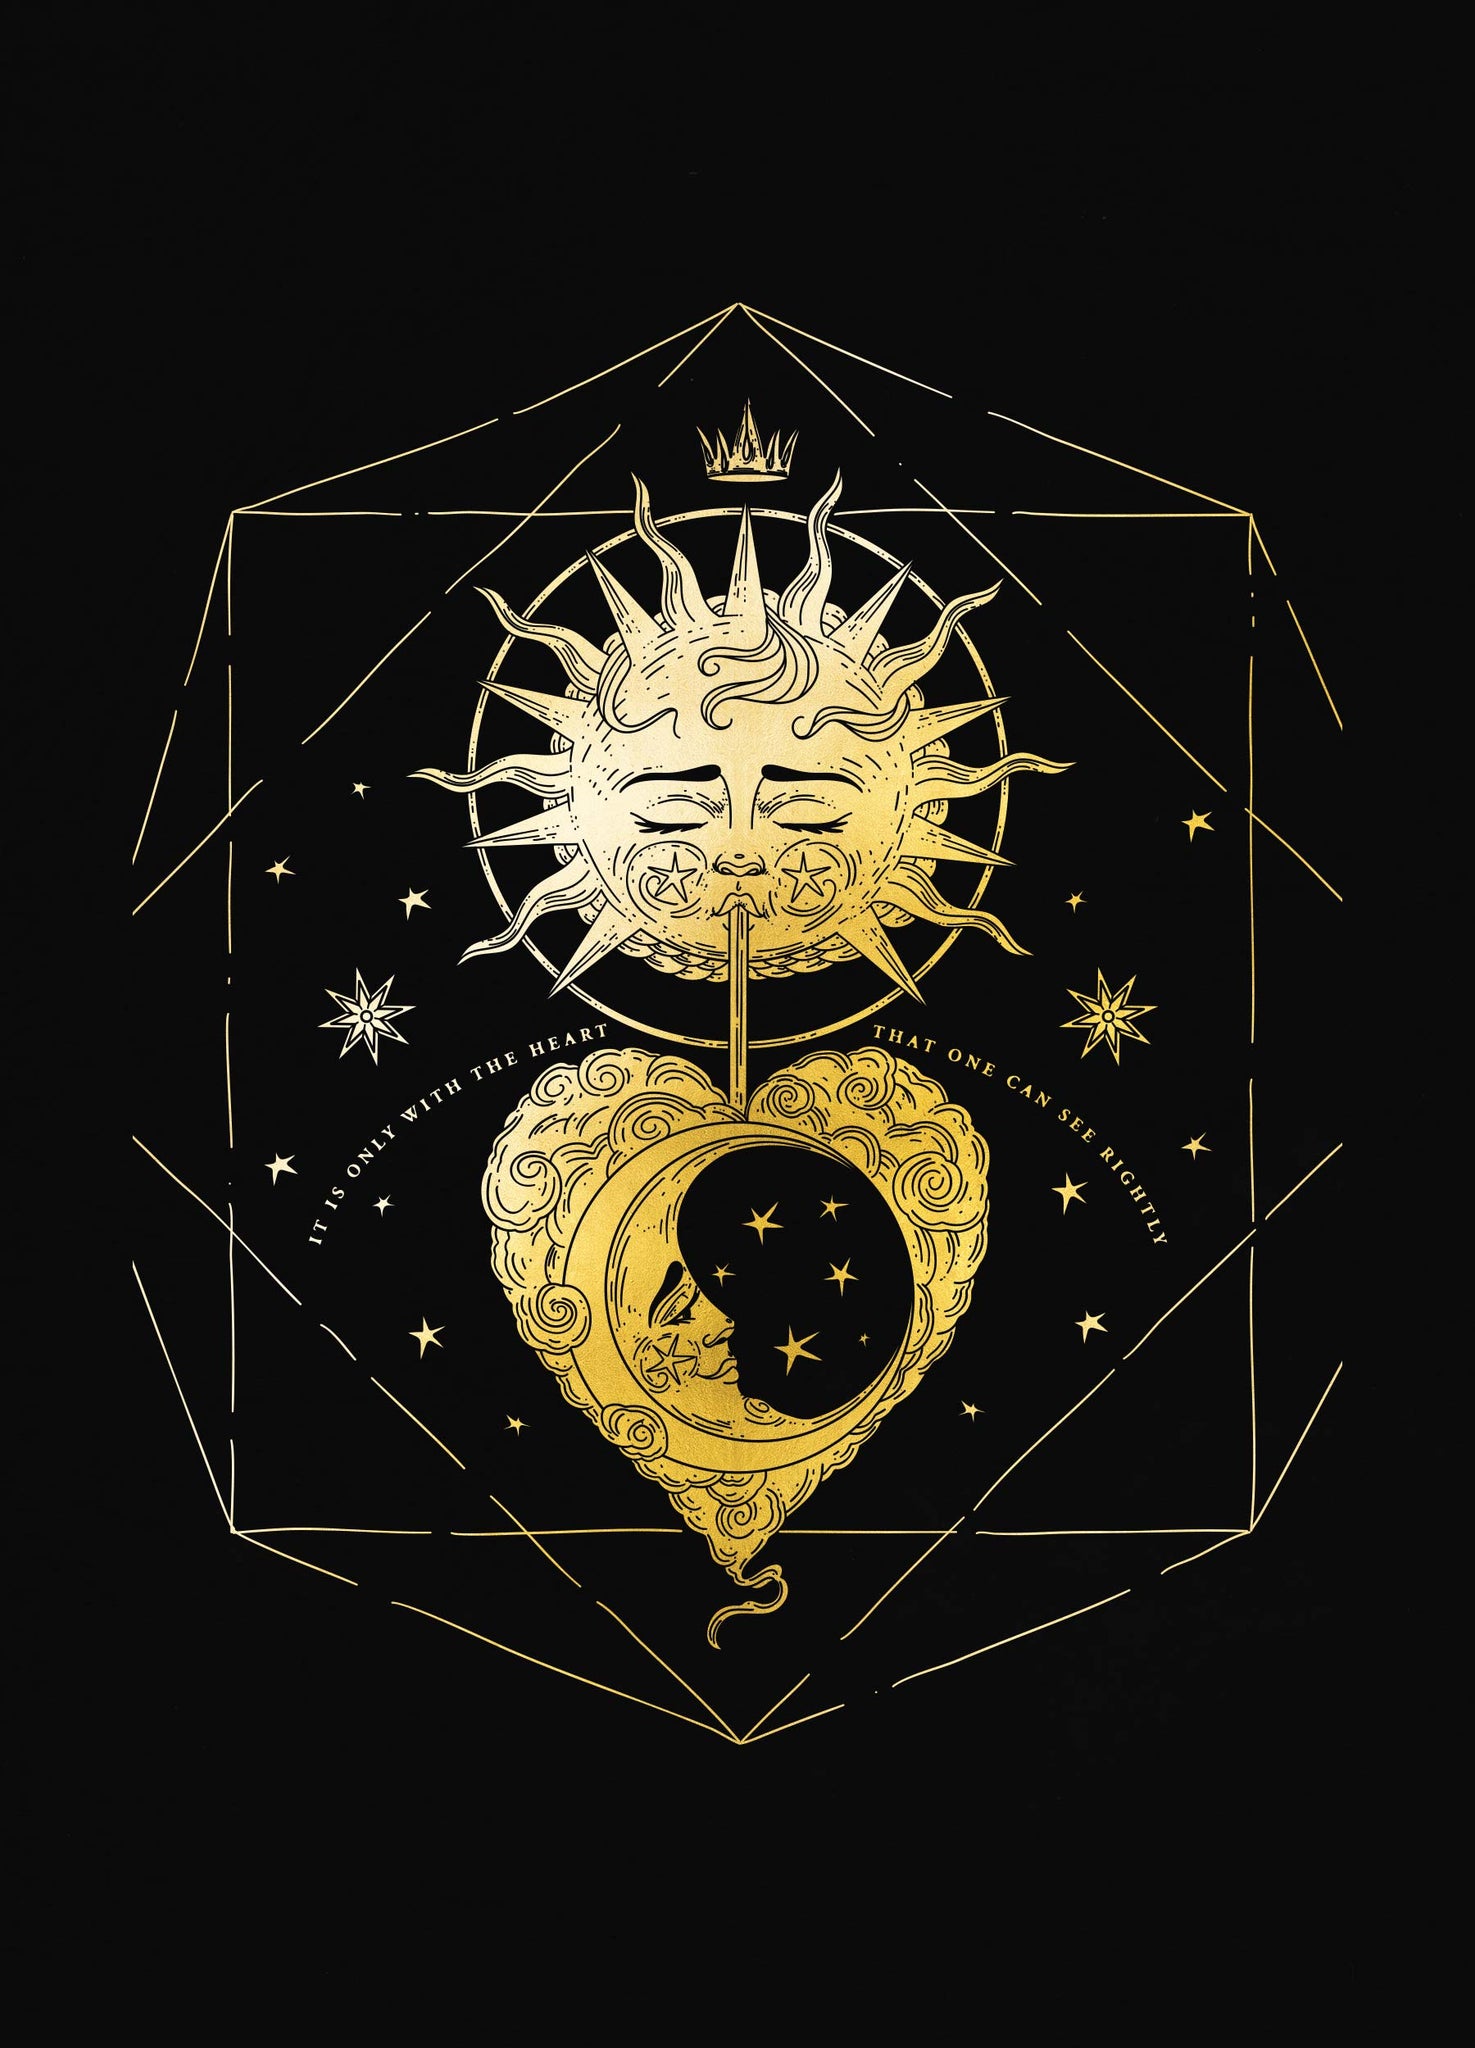 See with the heart sun blows kiss to the moon gold foil art print on black paper by Cocorrina & Co